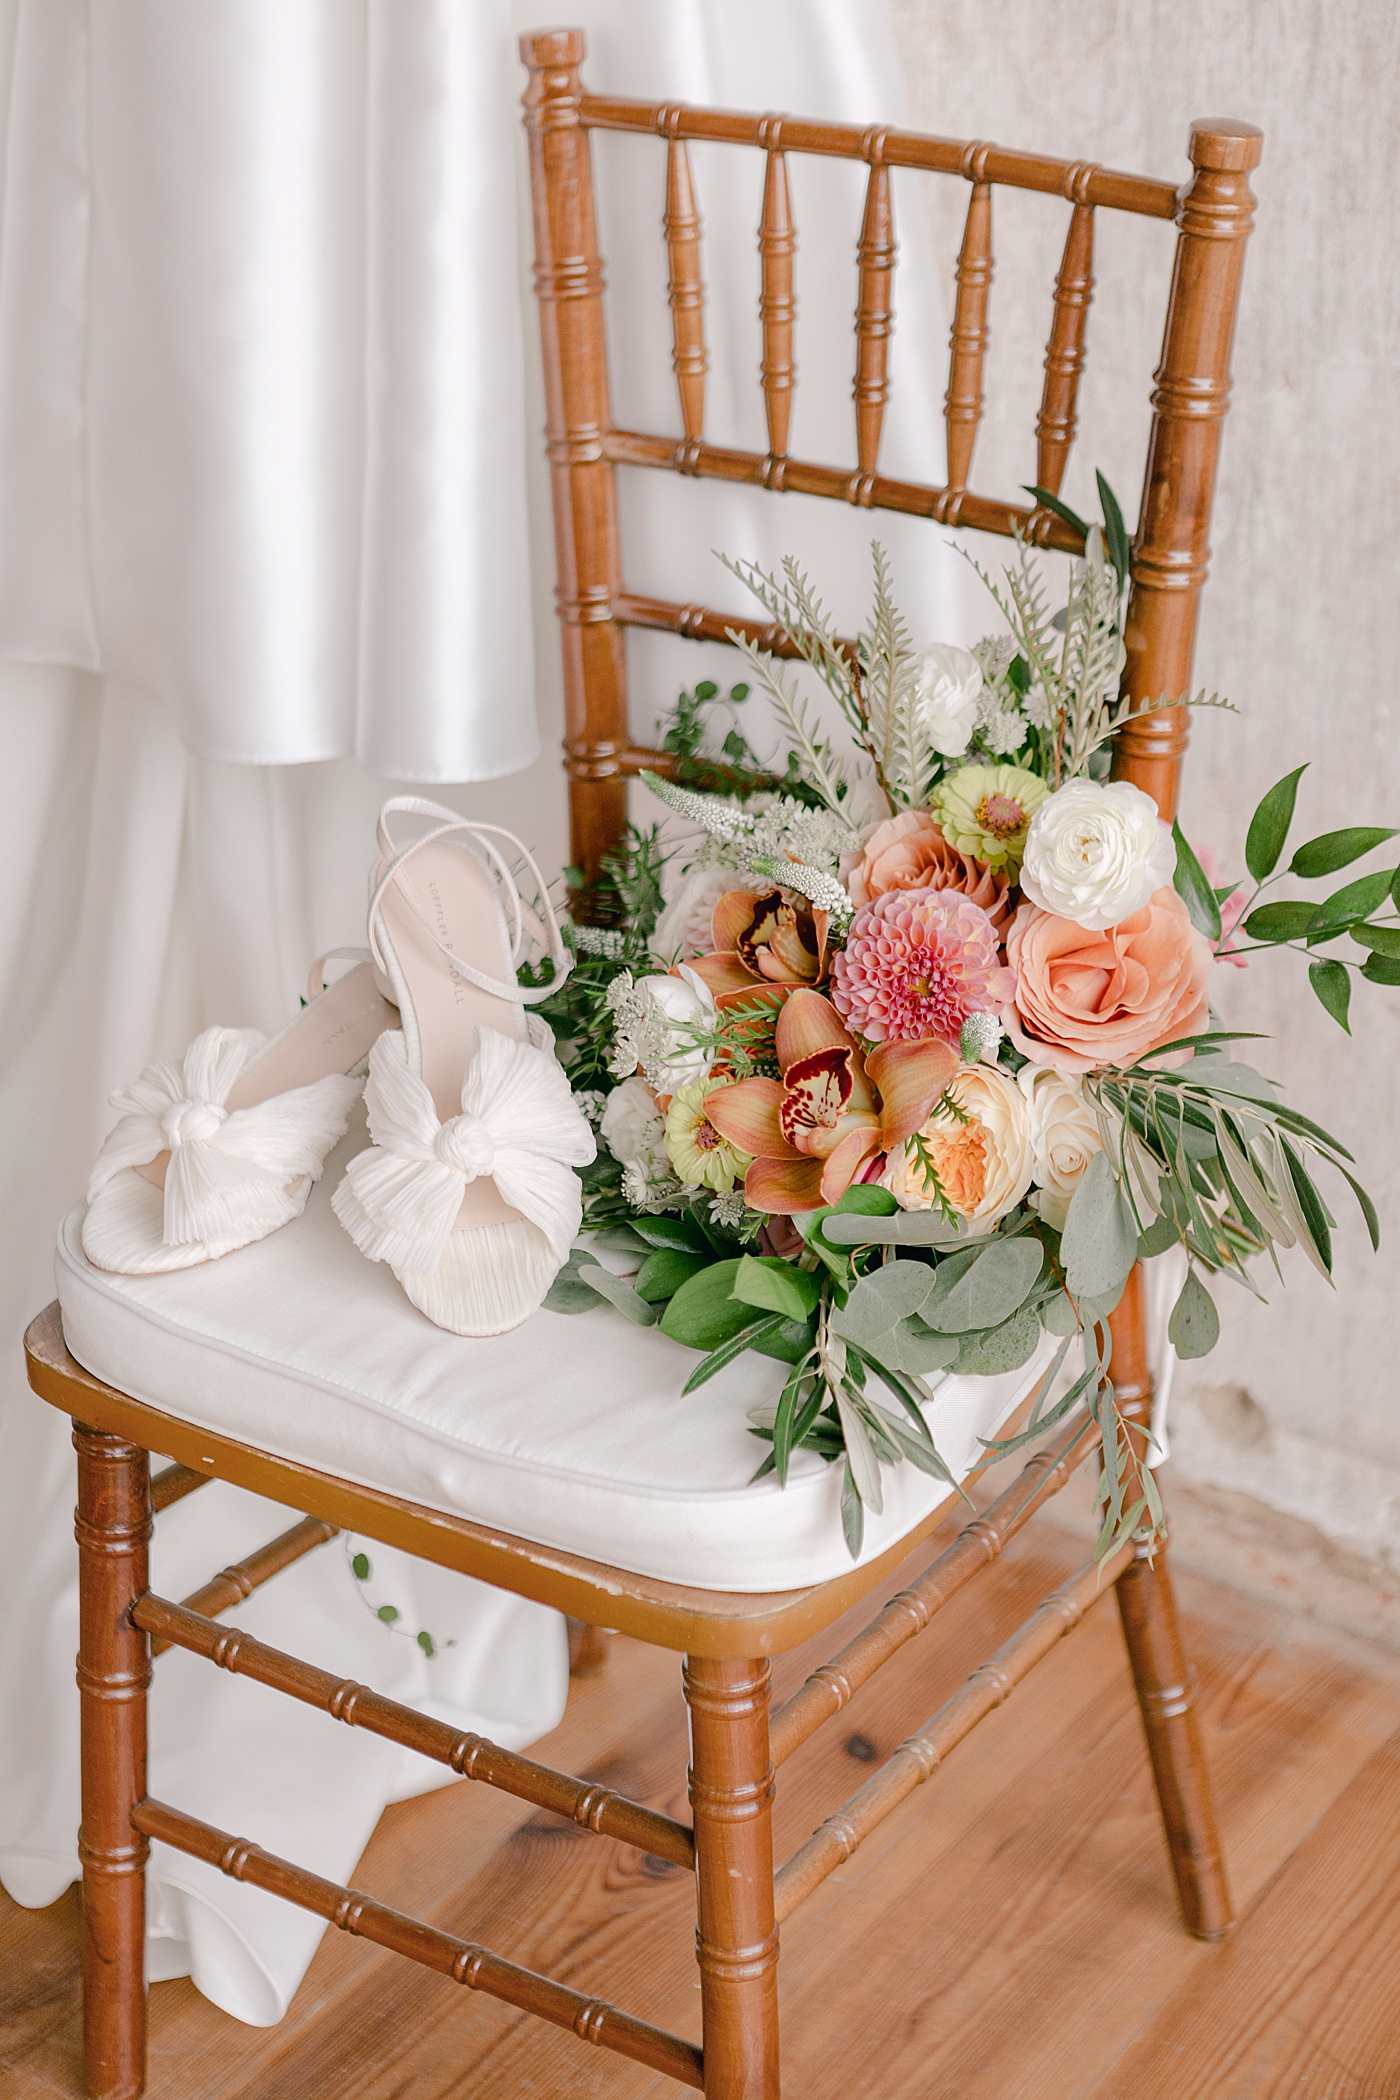 Bridal shoes sitting on a chair with bouquet | Photo by Hope Helmuth Photography